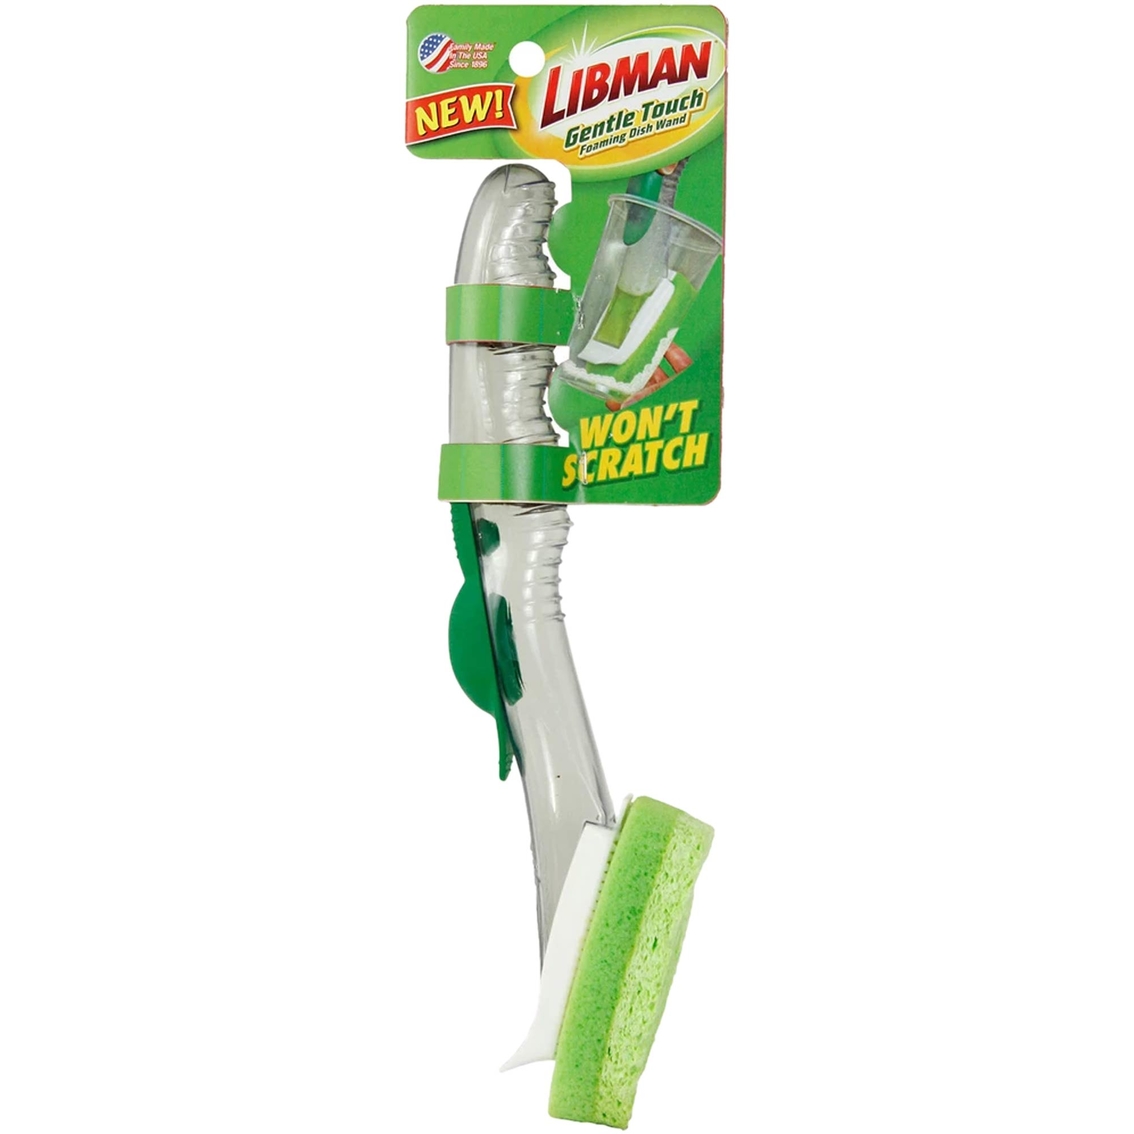 Libman Dish Sponge And Soap Dispenser, Cleaning Tools, Household